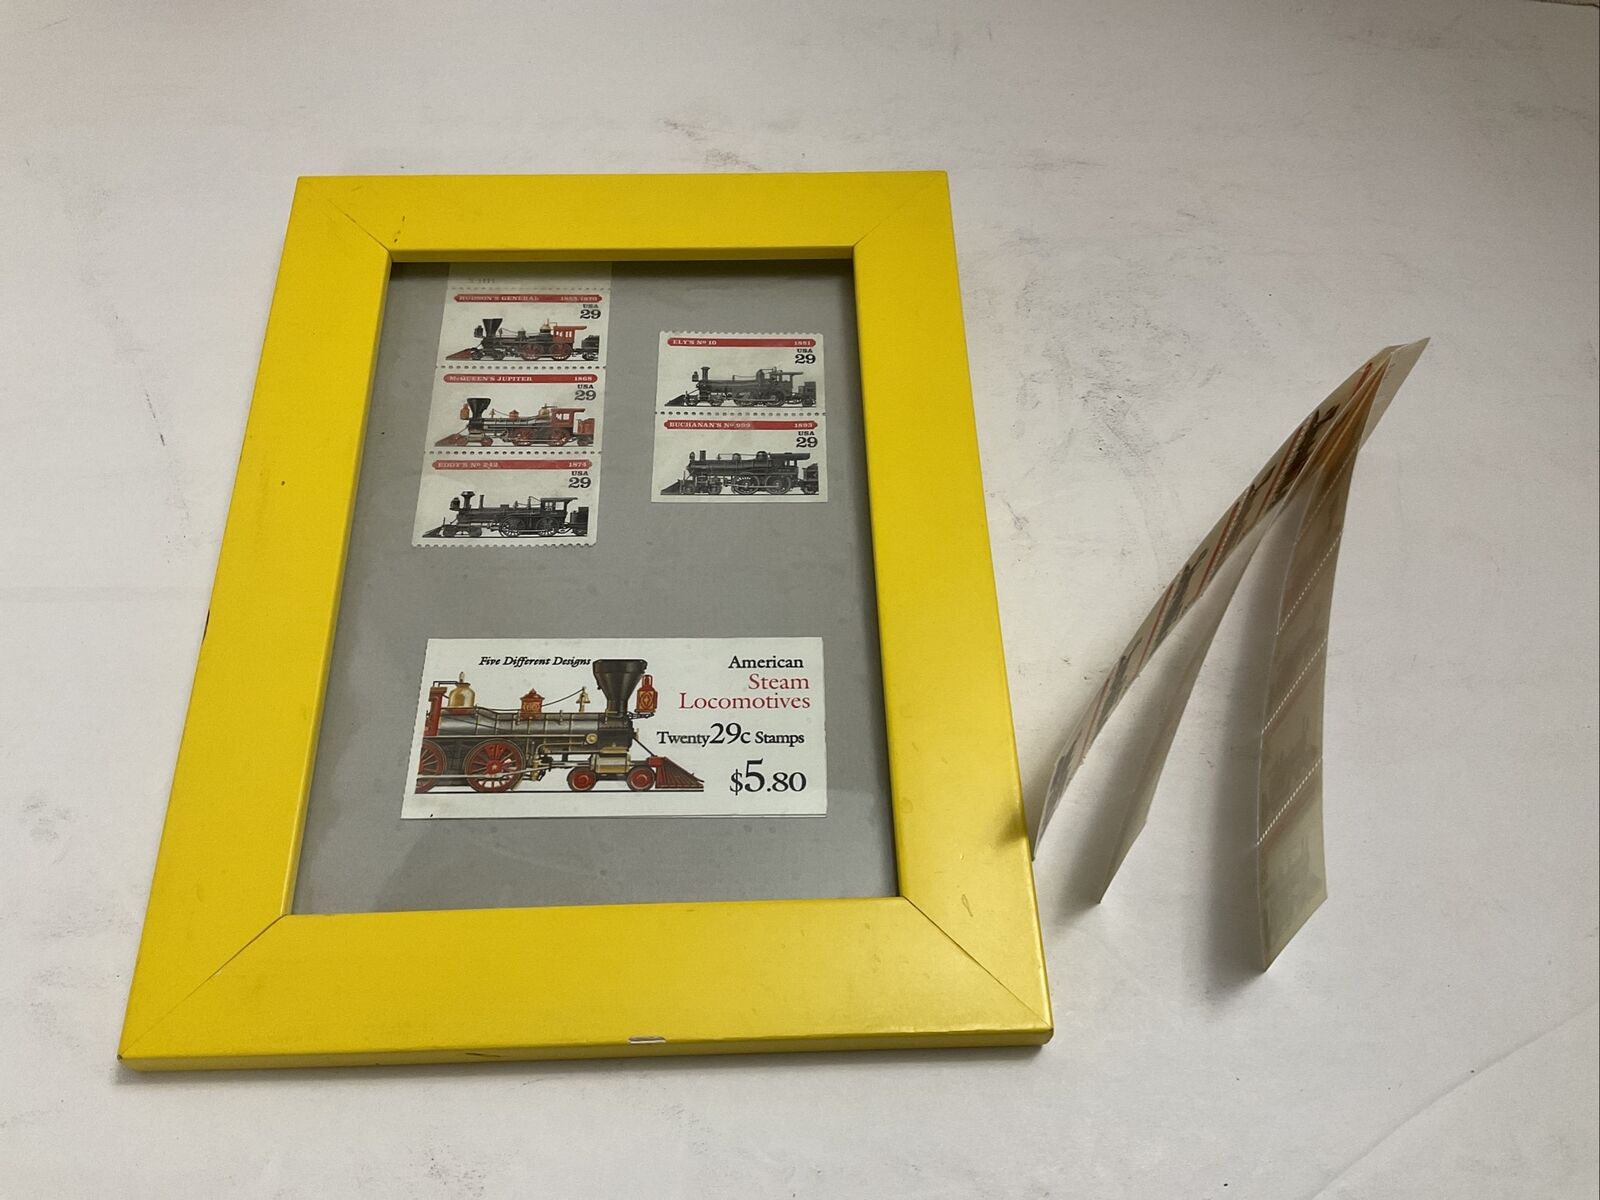 AMERICAN STEAM LOCOMOTIVES - 4 SETs OF 5 U.S. TRAIN STAMPS 1 FRAMED YELLOW